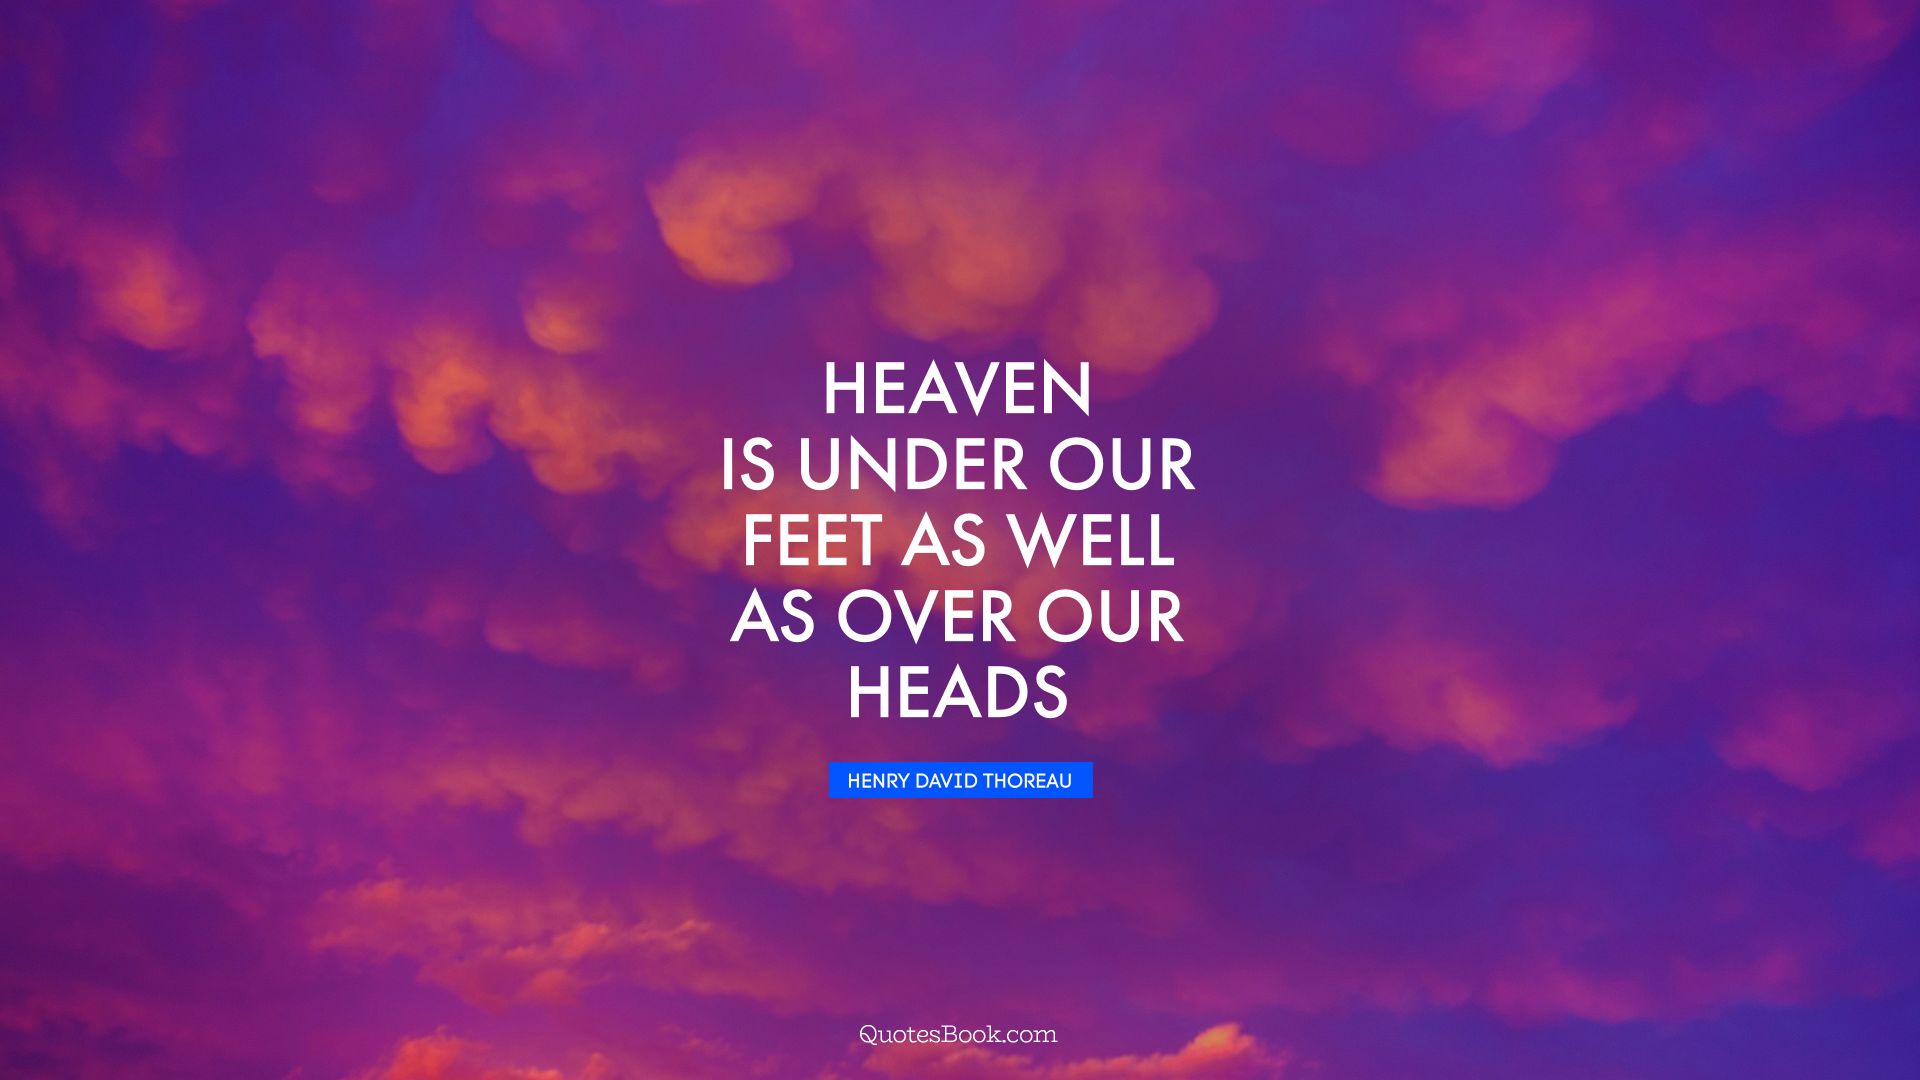 Heaven is under our feet as well as over our heads. - Quote by Henry David Thoreau